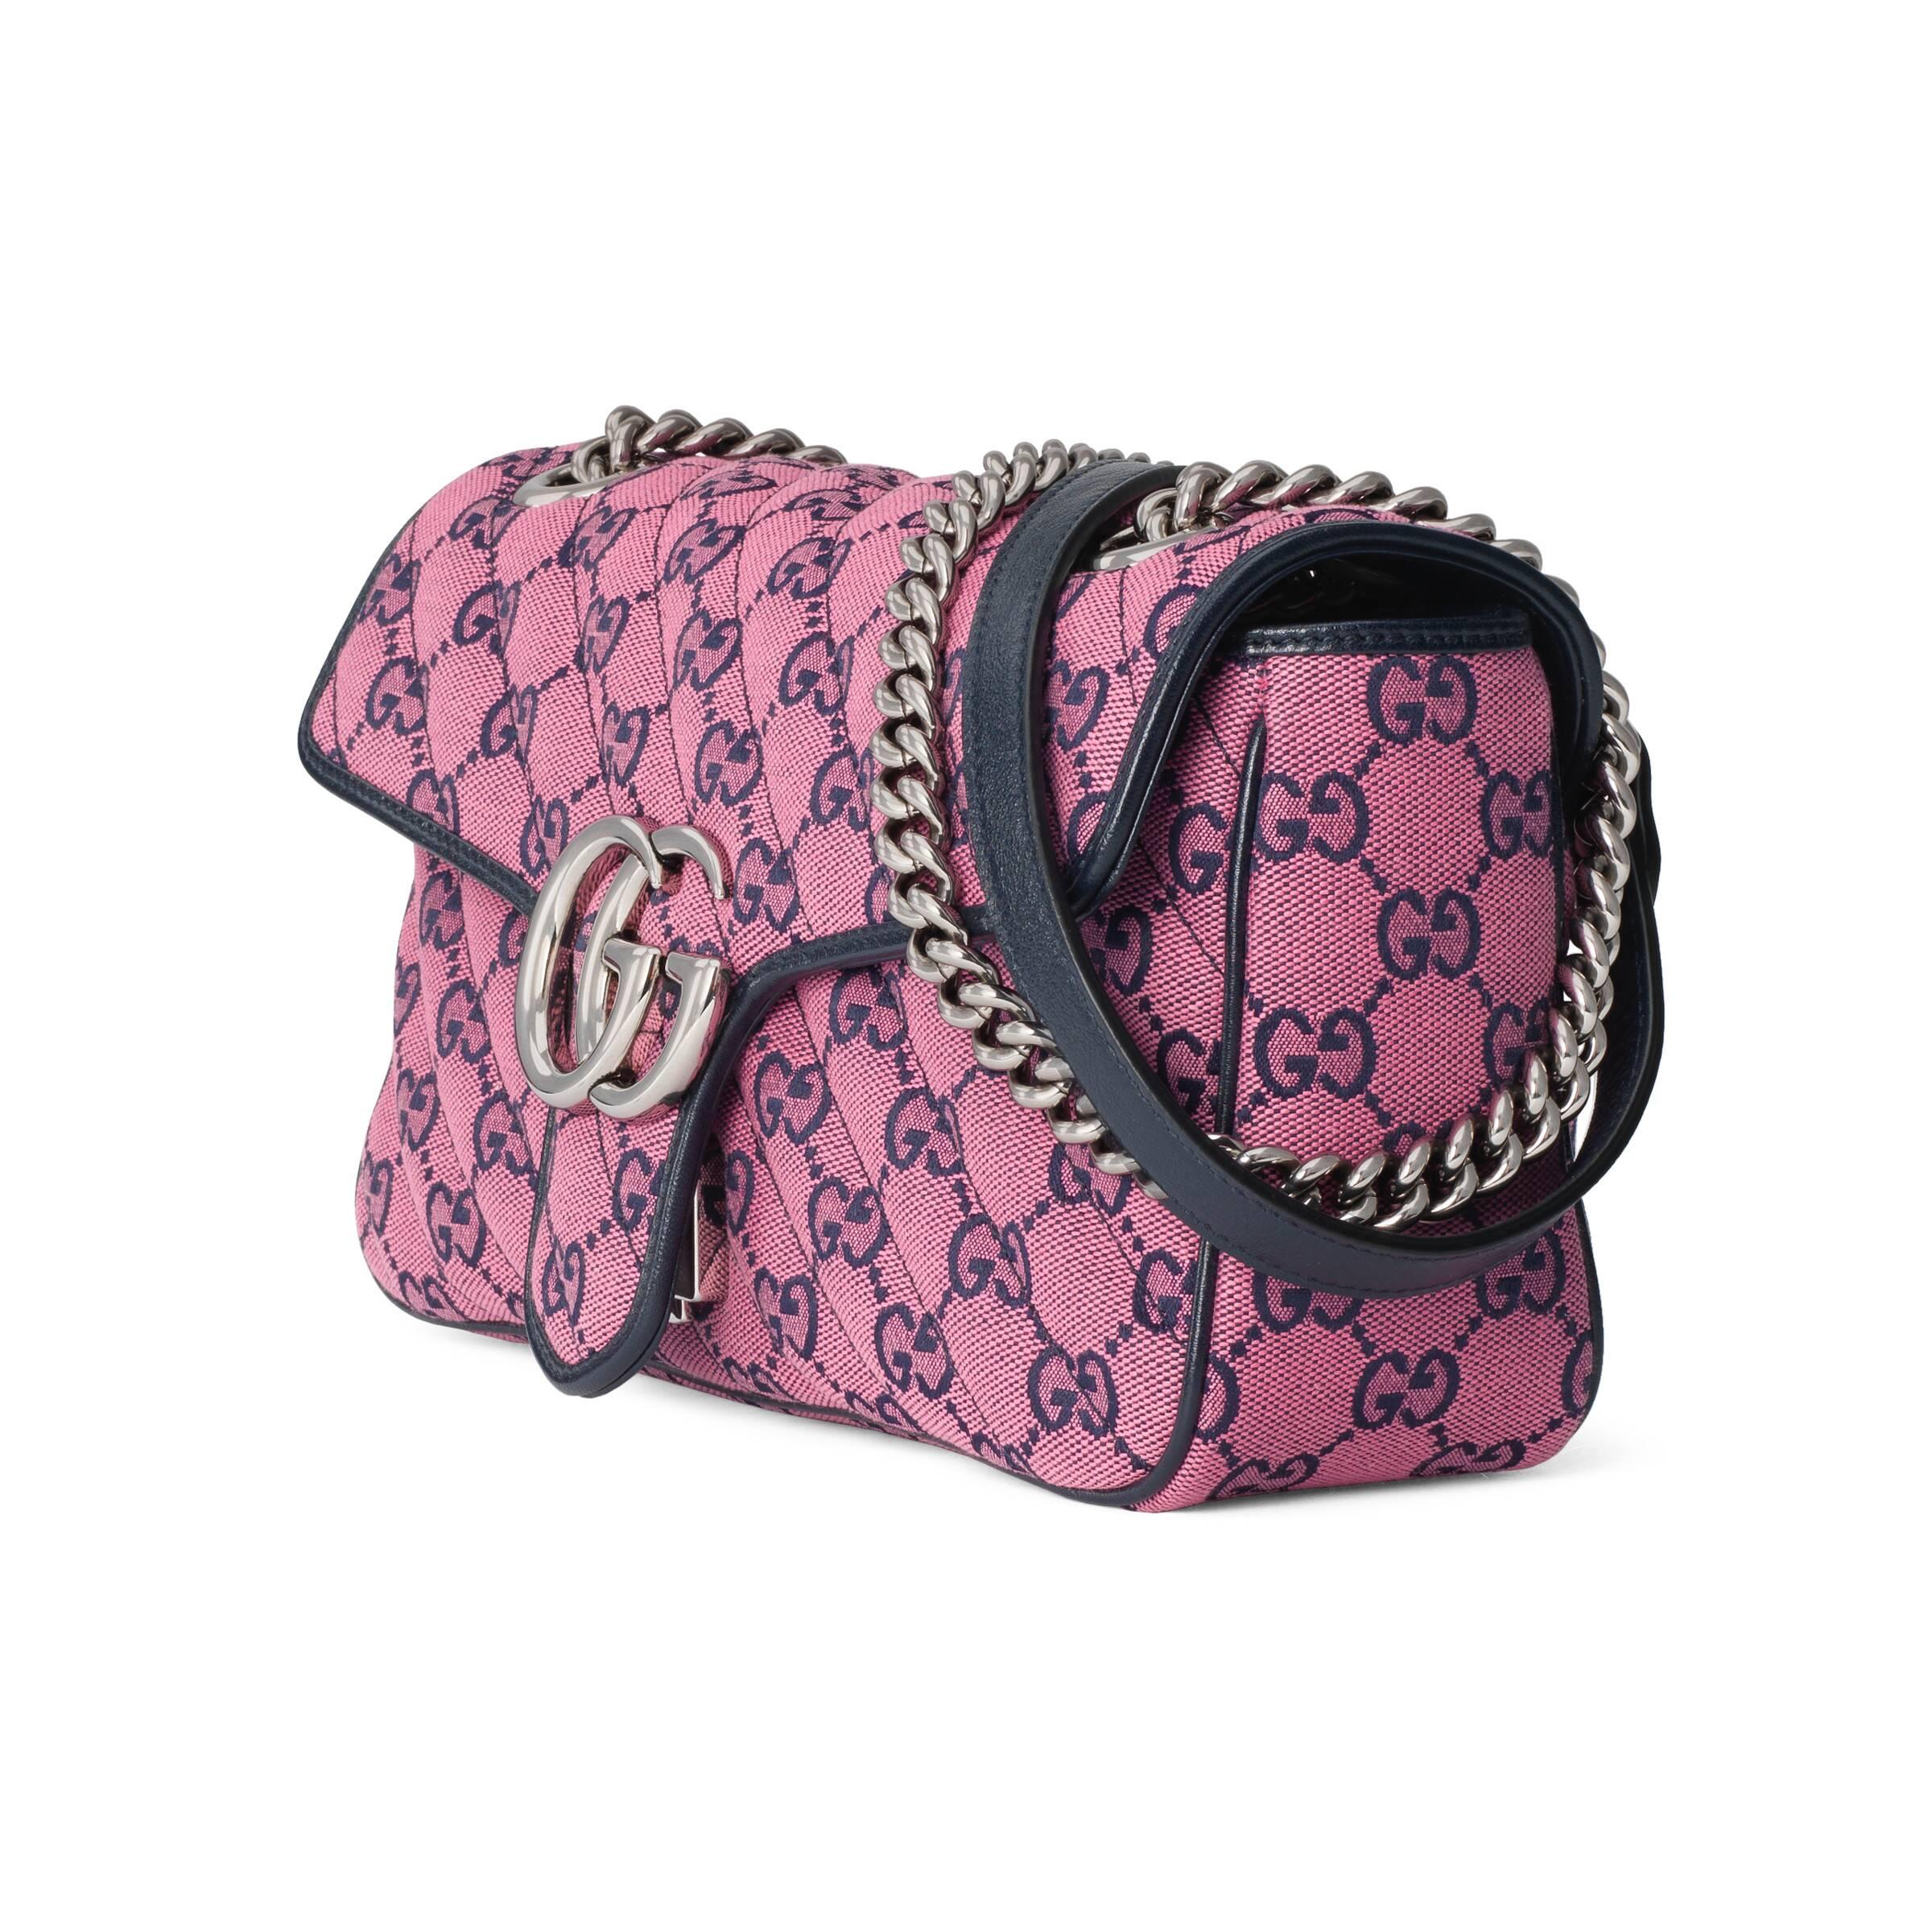 Gucci GG Marmont Multicolour Small Shoulder Bag in Pink | Lyst